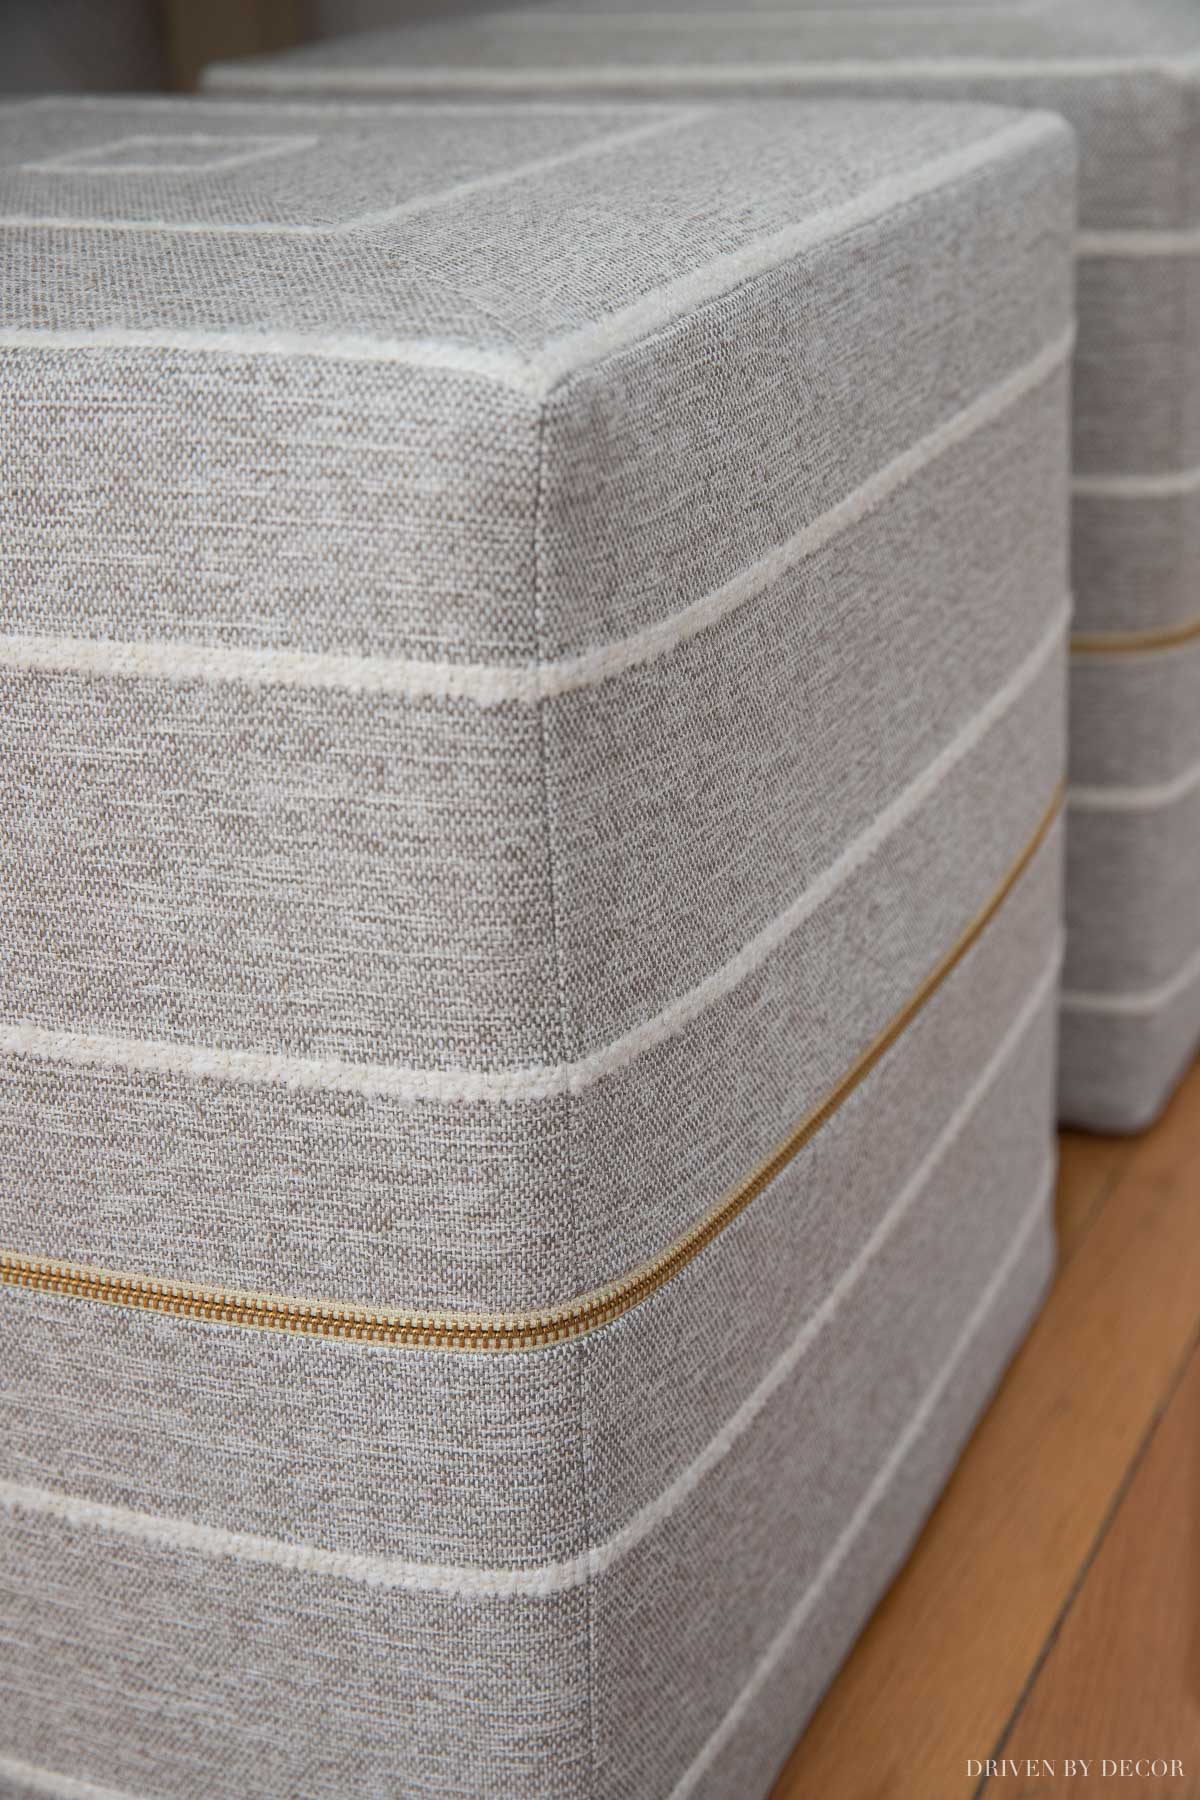 Love the gorgeous brass zippers on these cube ottomans!